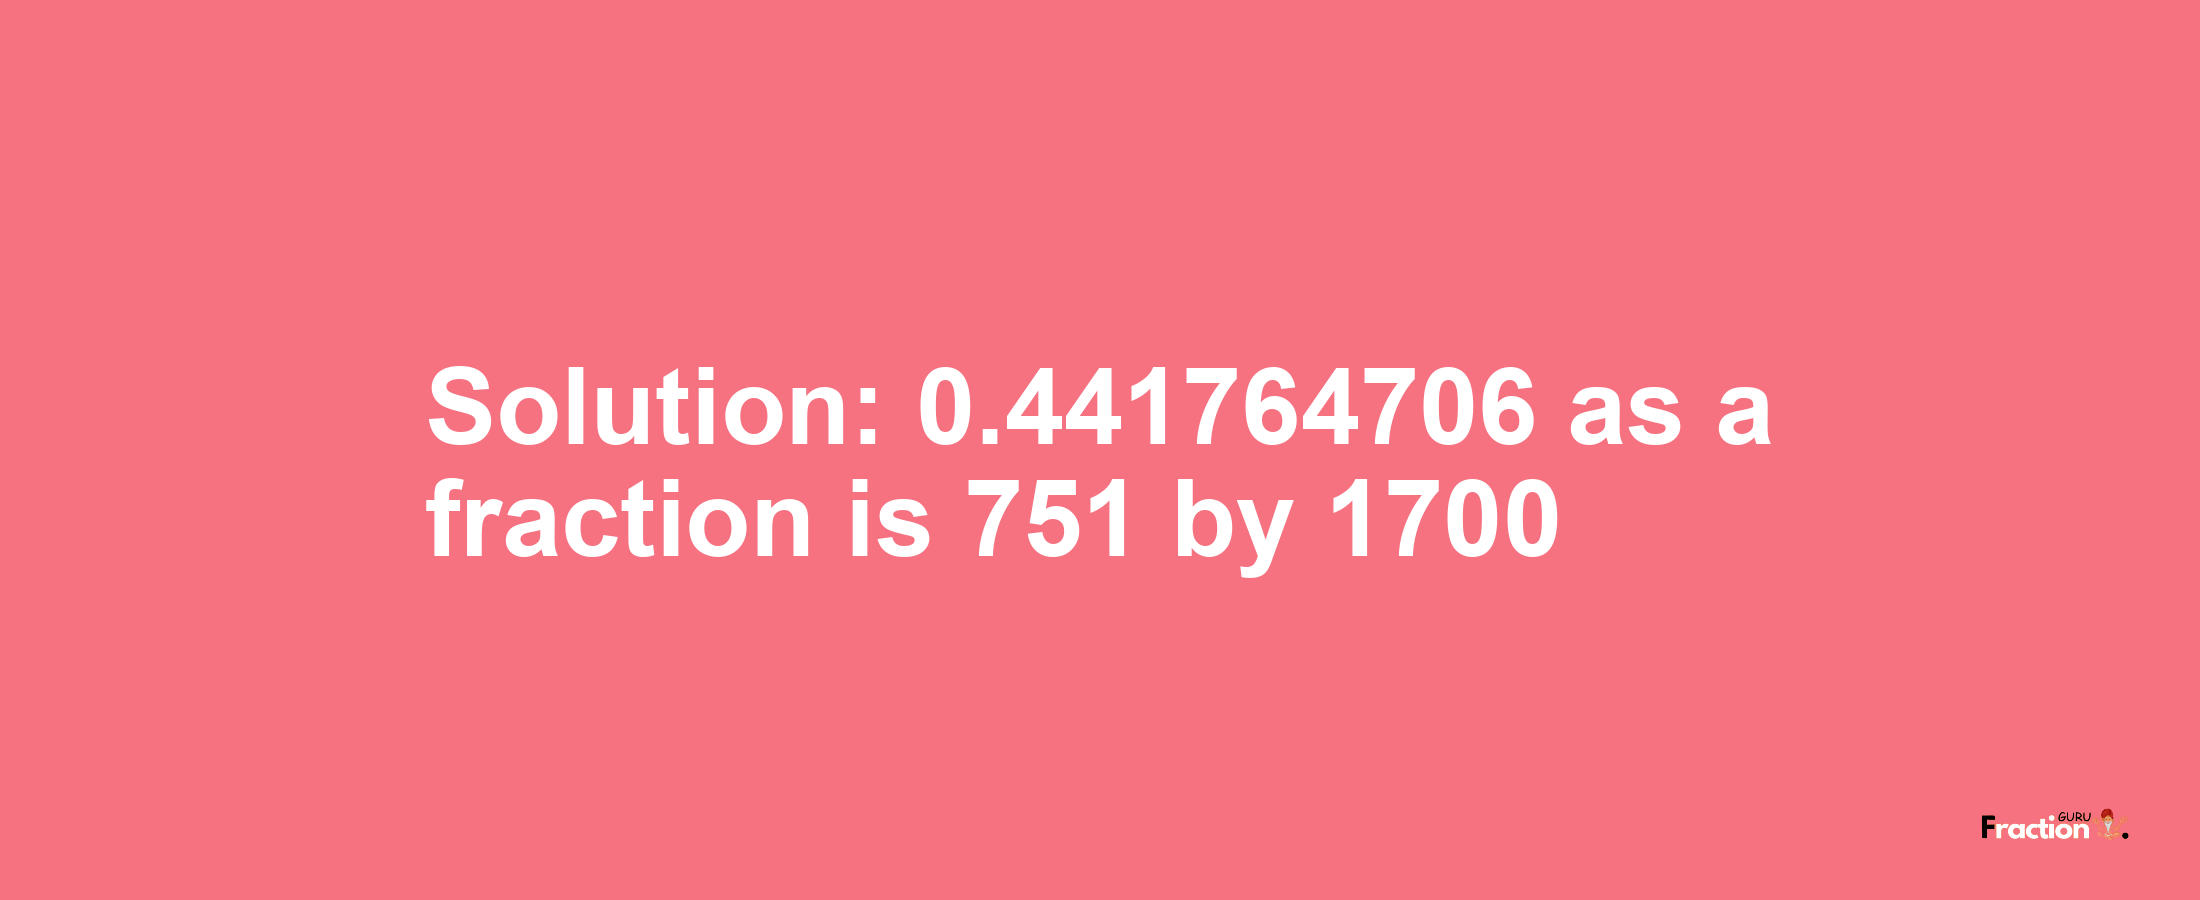 Solution:0.441764706 as a fraction is 751/1700